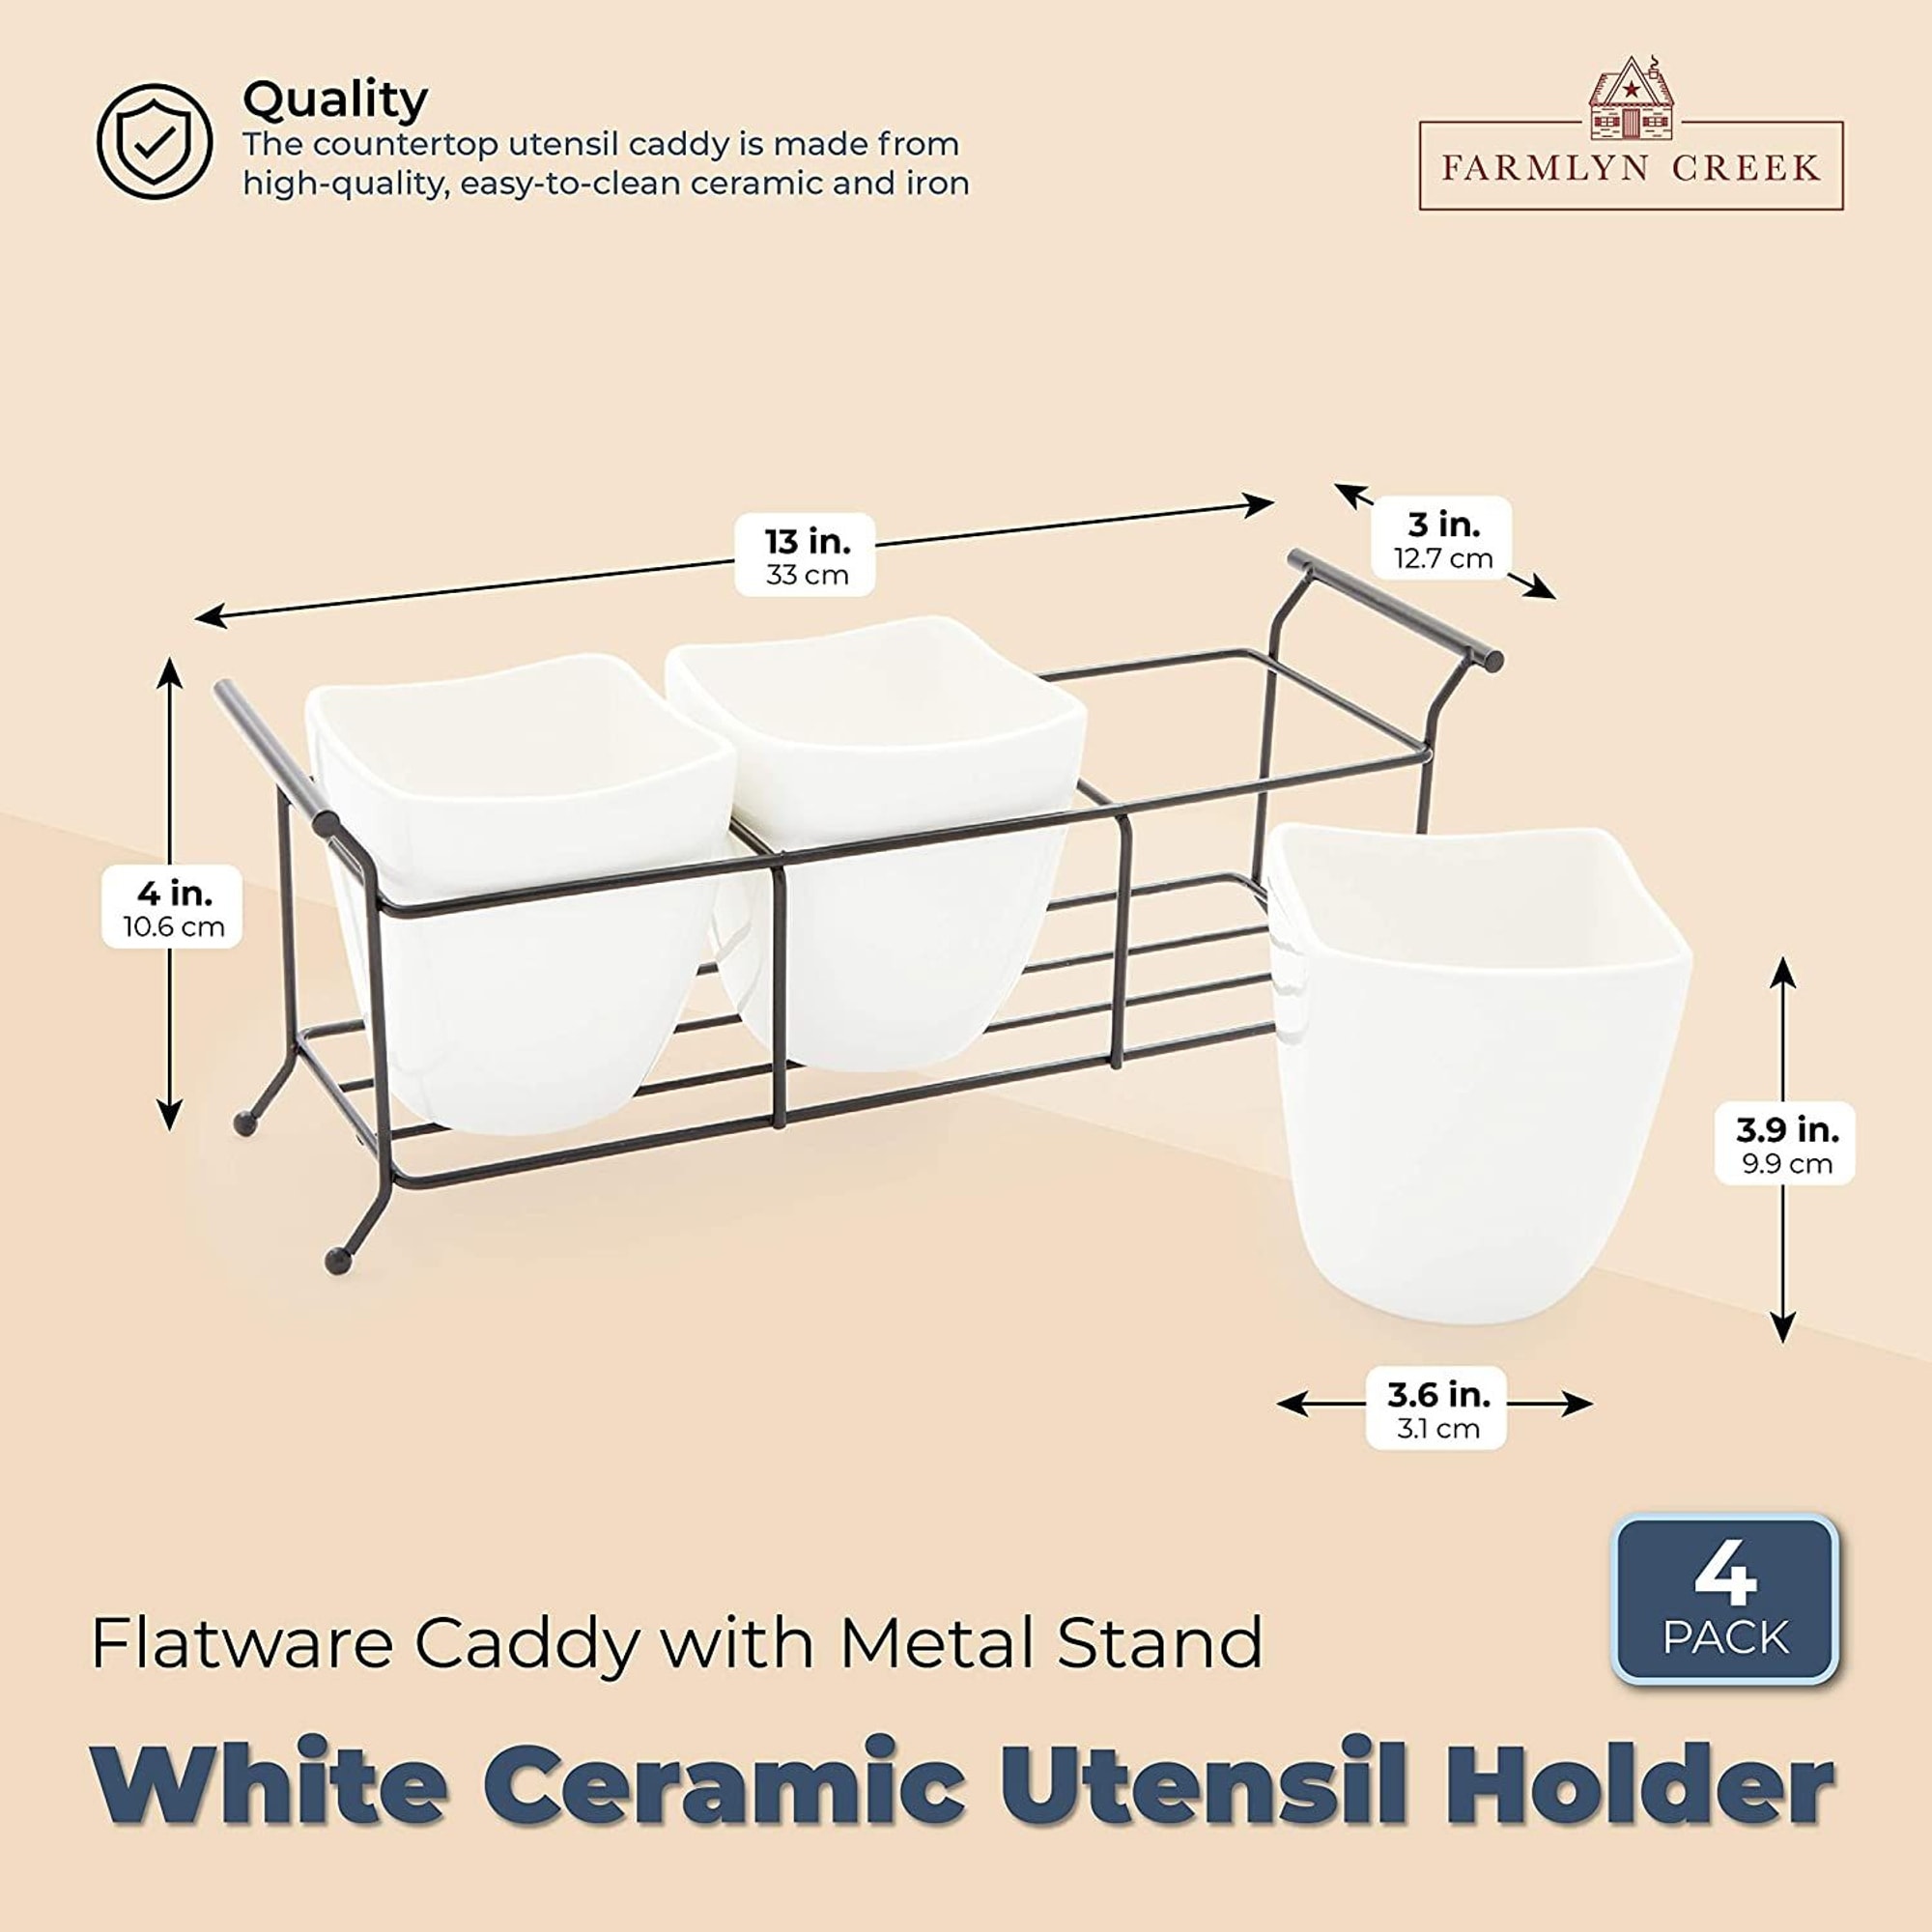 https://ak1.ostkcdn.com/images/products/is/images/direct/a6cb025441812f305e143877861cba1fd07156cd/White-Ceramic-Utensil-Holder%2C-Flatware-Caddy-with-Metal-Stand-%2813-x-4-x-5-In%29.jpg